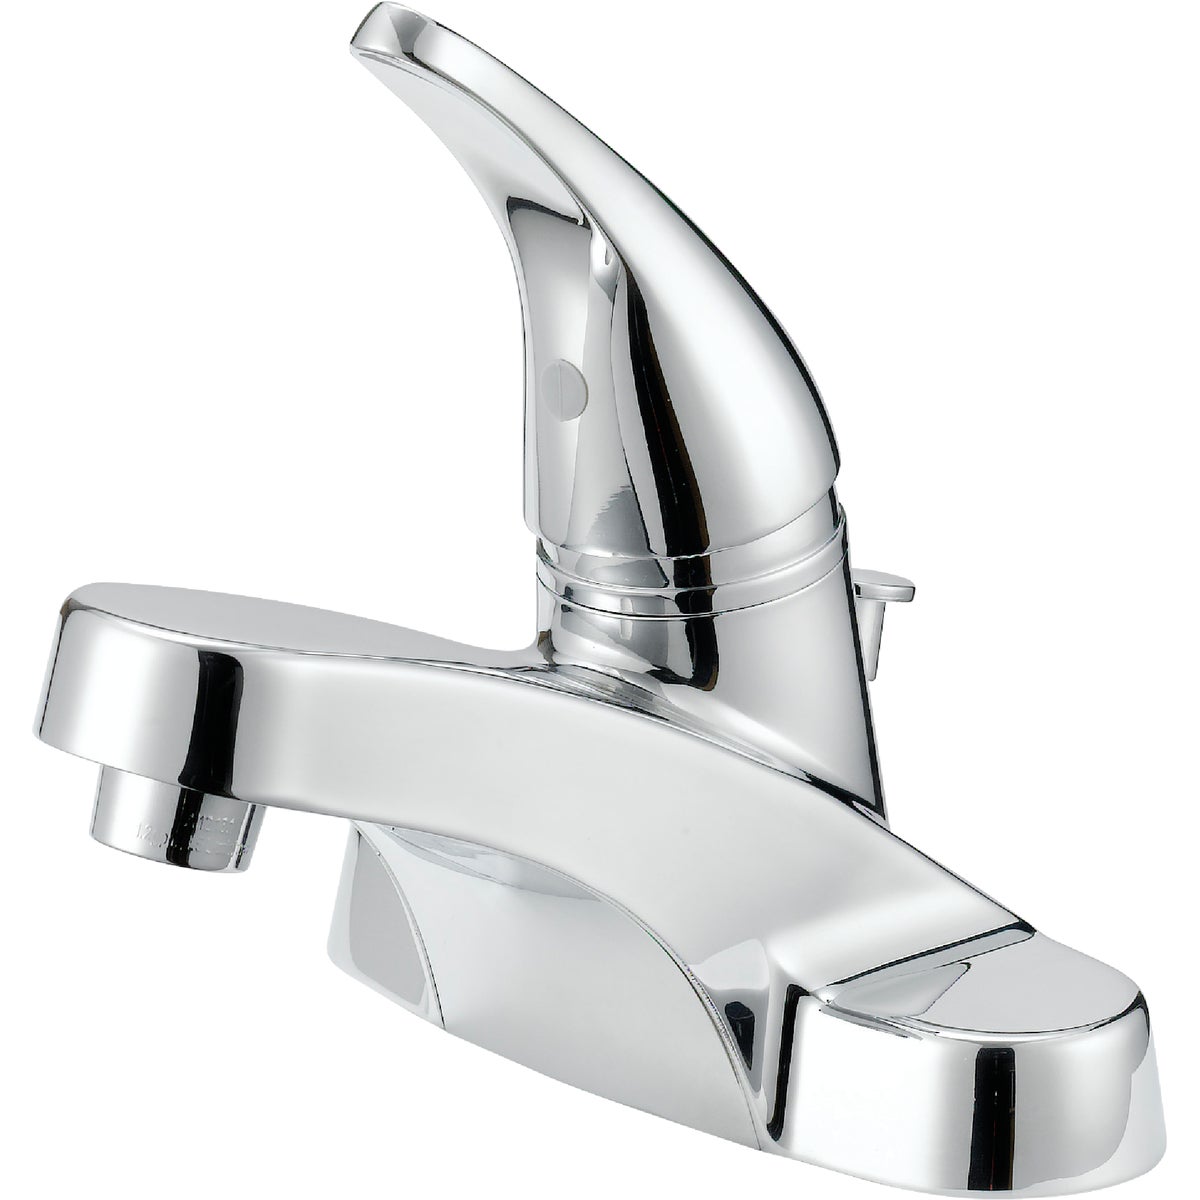 Item 405208, Single metal handle bathroom faucet with quick connect pop-up drain.